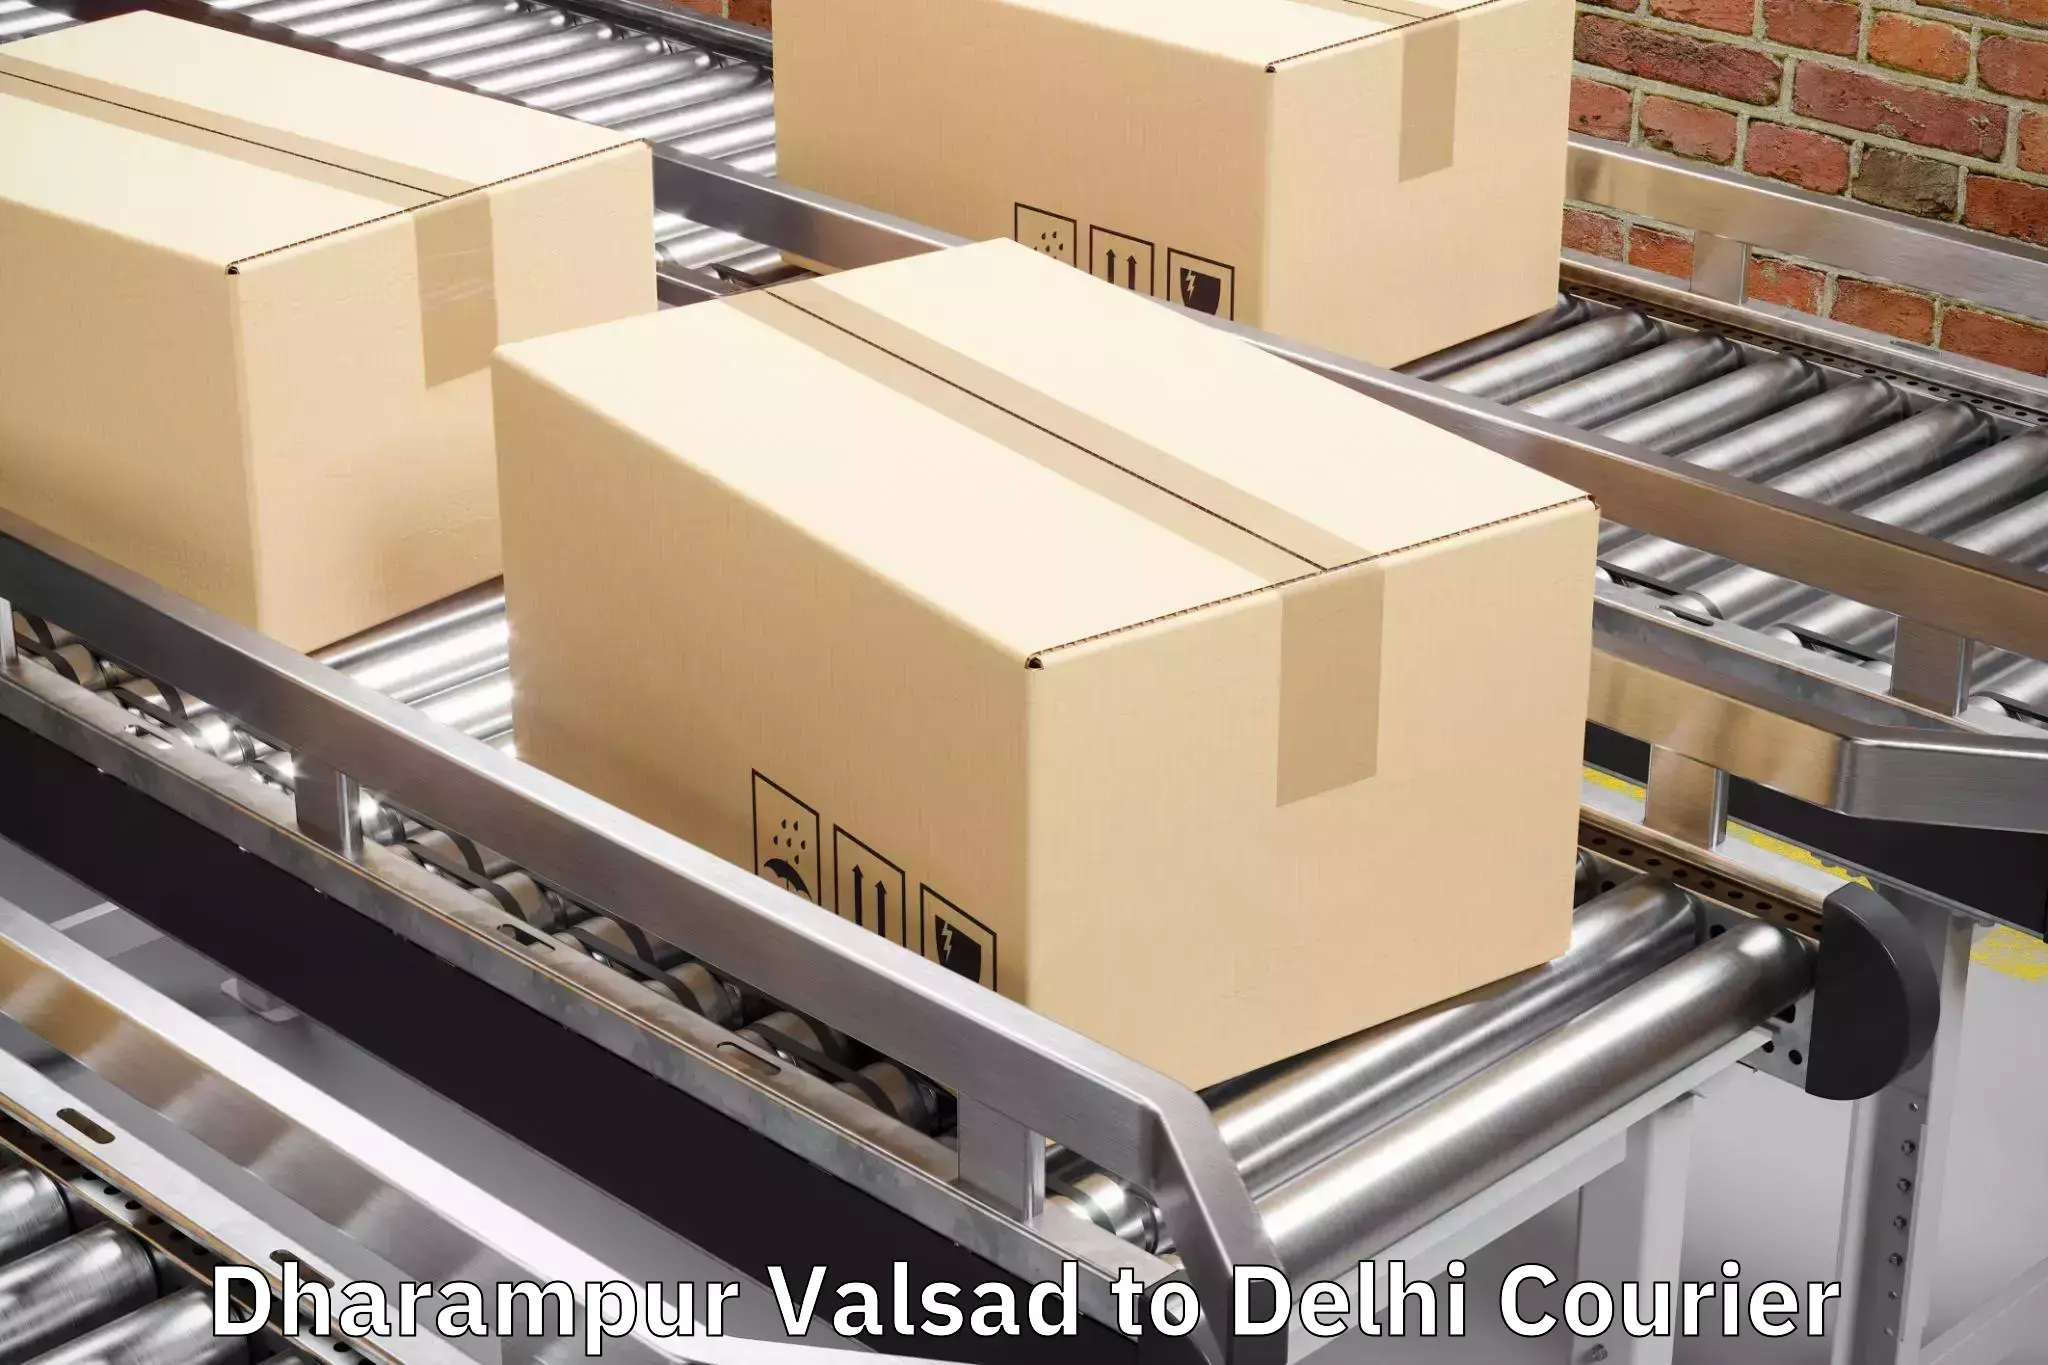 Baggage shipping service Dharampur Valsad to Lodhi Road